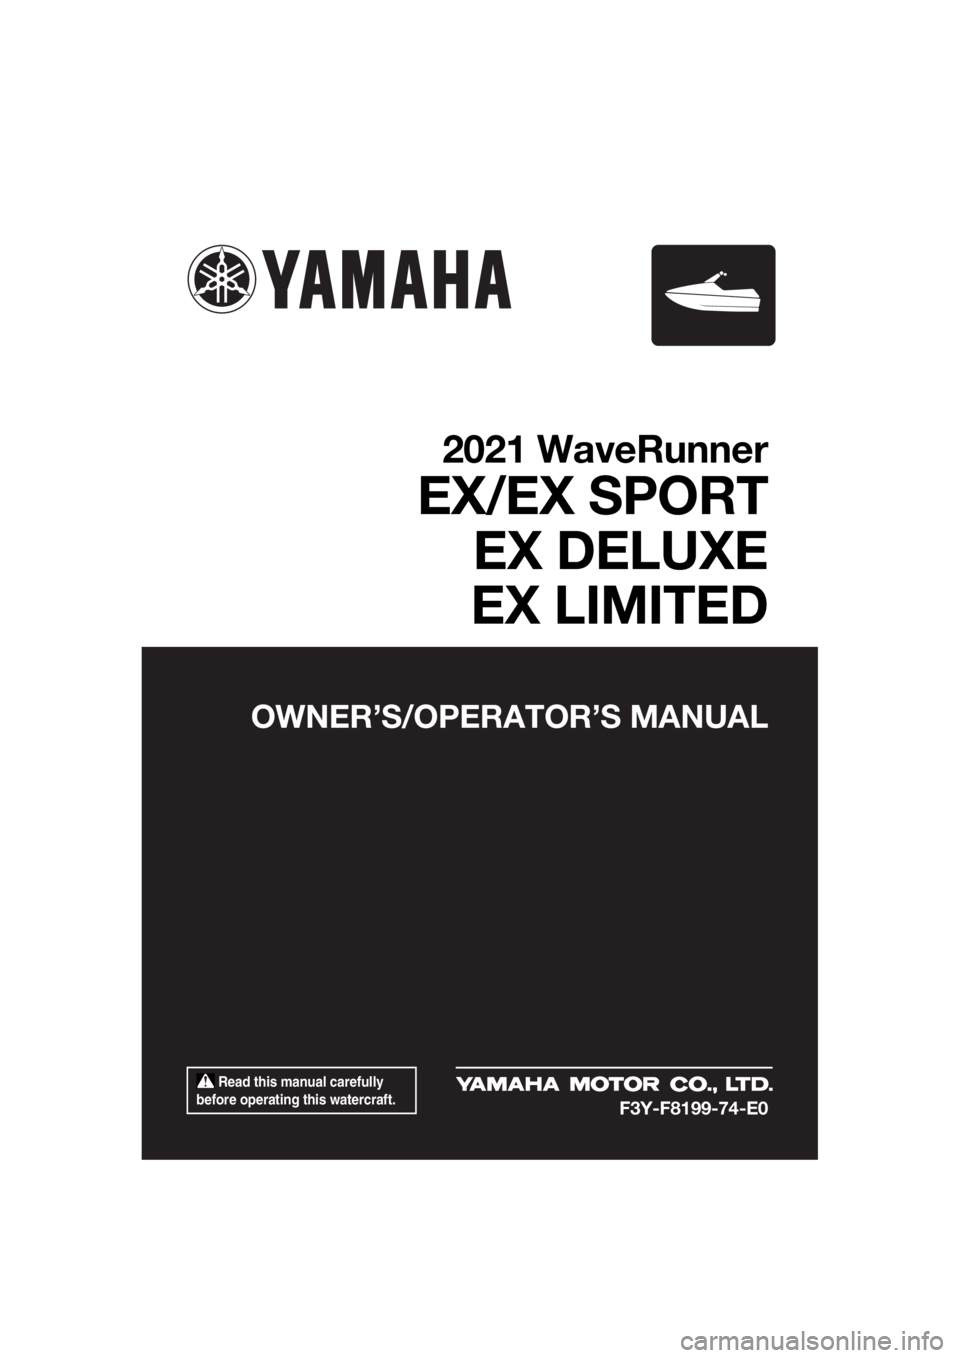 YAMAHA EX LIMITED 2021  Owners Manual  Read this manual carefully 
before operating this watercraft.
OWNER’S/OPERAT OR’S MANUAL
2021 WaveRunner
EX/EX SPORT
EX DELUXE
EX LIMITED
F3Y-F8199-74-E0
UF3Y74E0.book  Page 1  Monday, June 22, 2